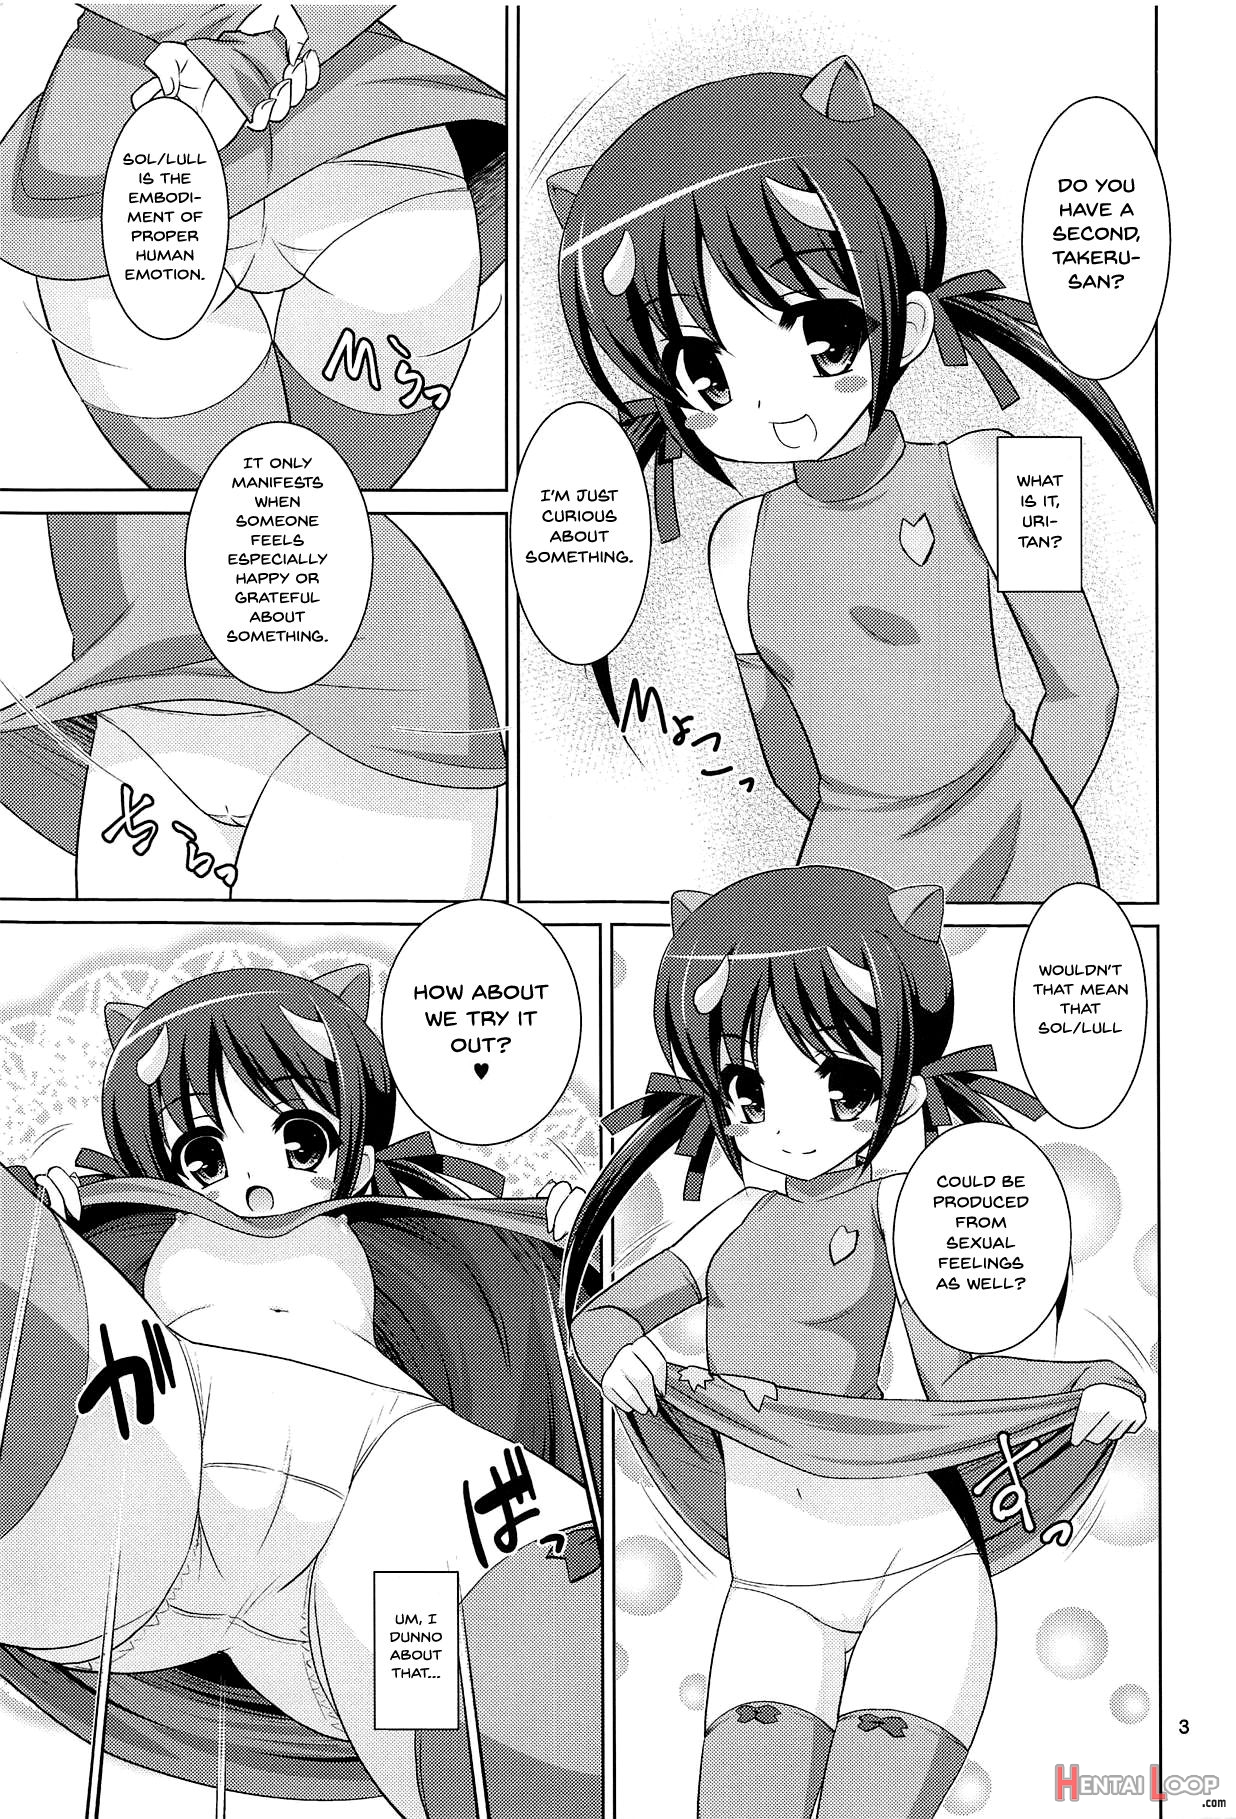 Go Go Eto-musume page 2